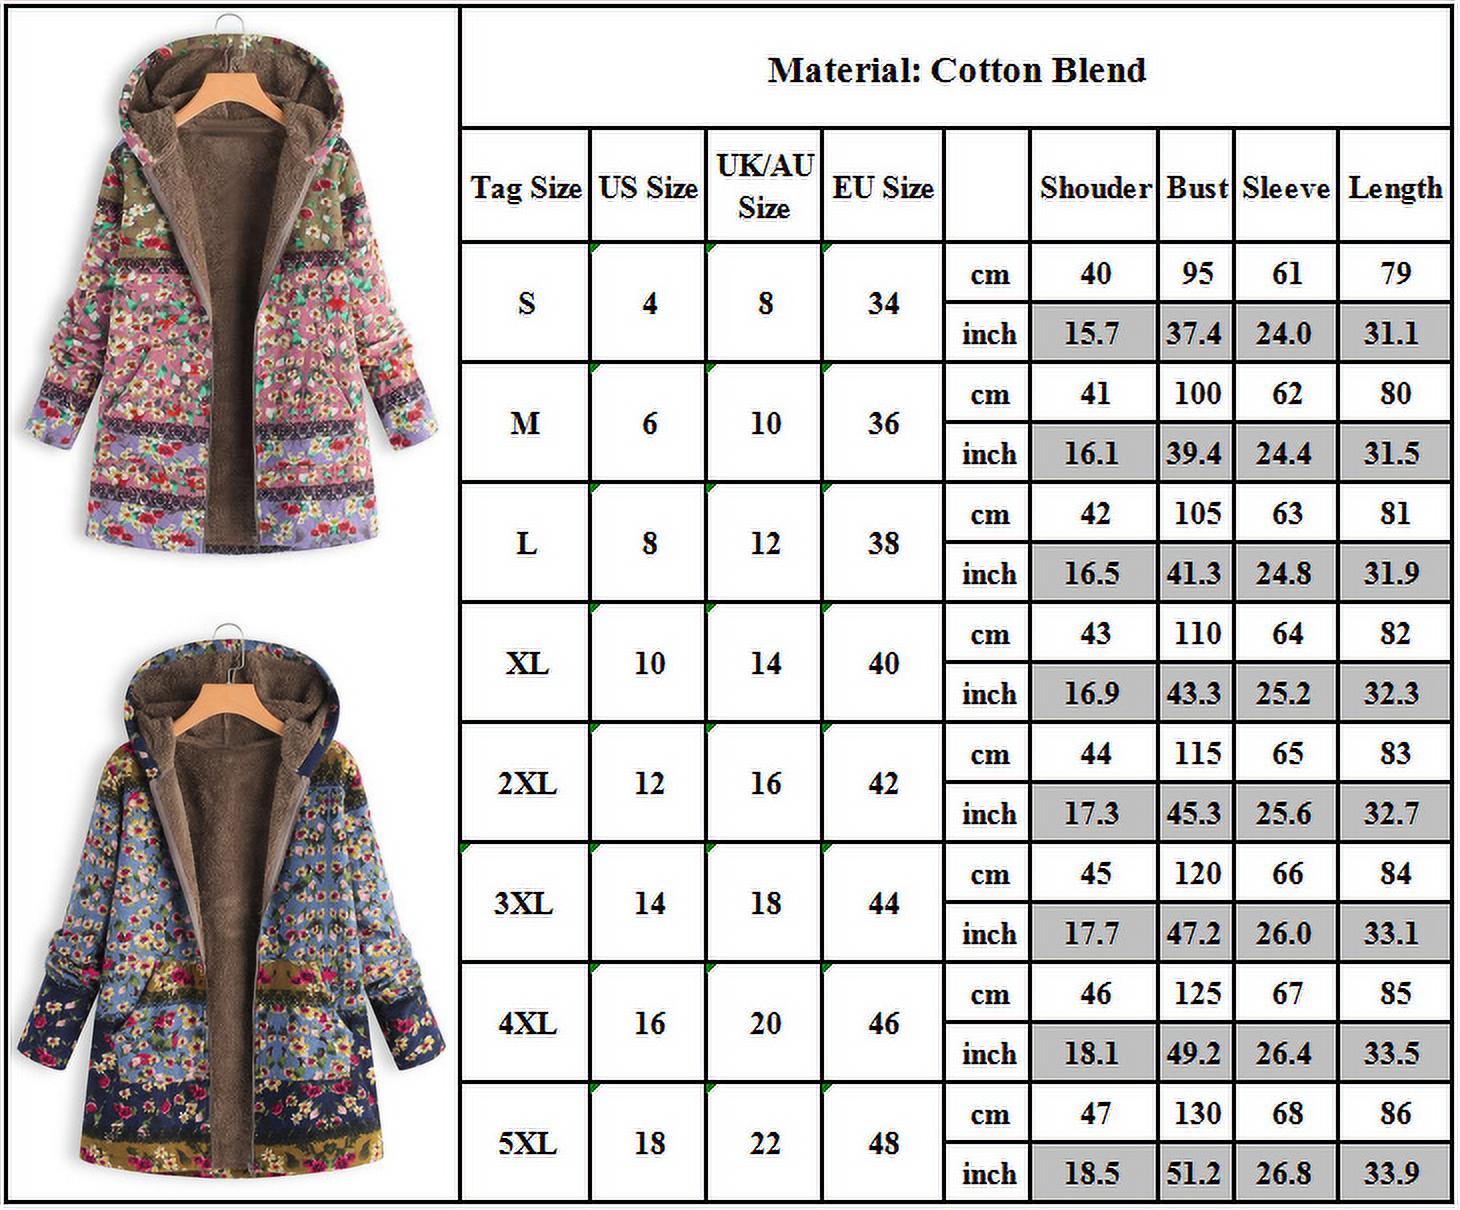 Women Winter Coat Floral Printed Hooded with Pockets Warm Fleece Button Coat Long Sleeve Jacket - image 2 of 8